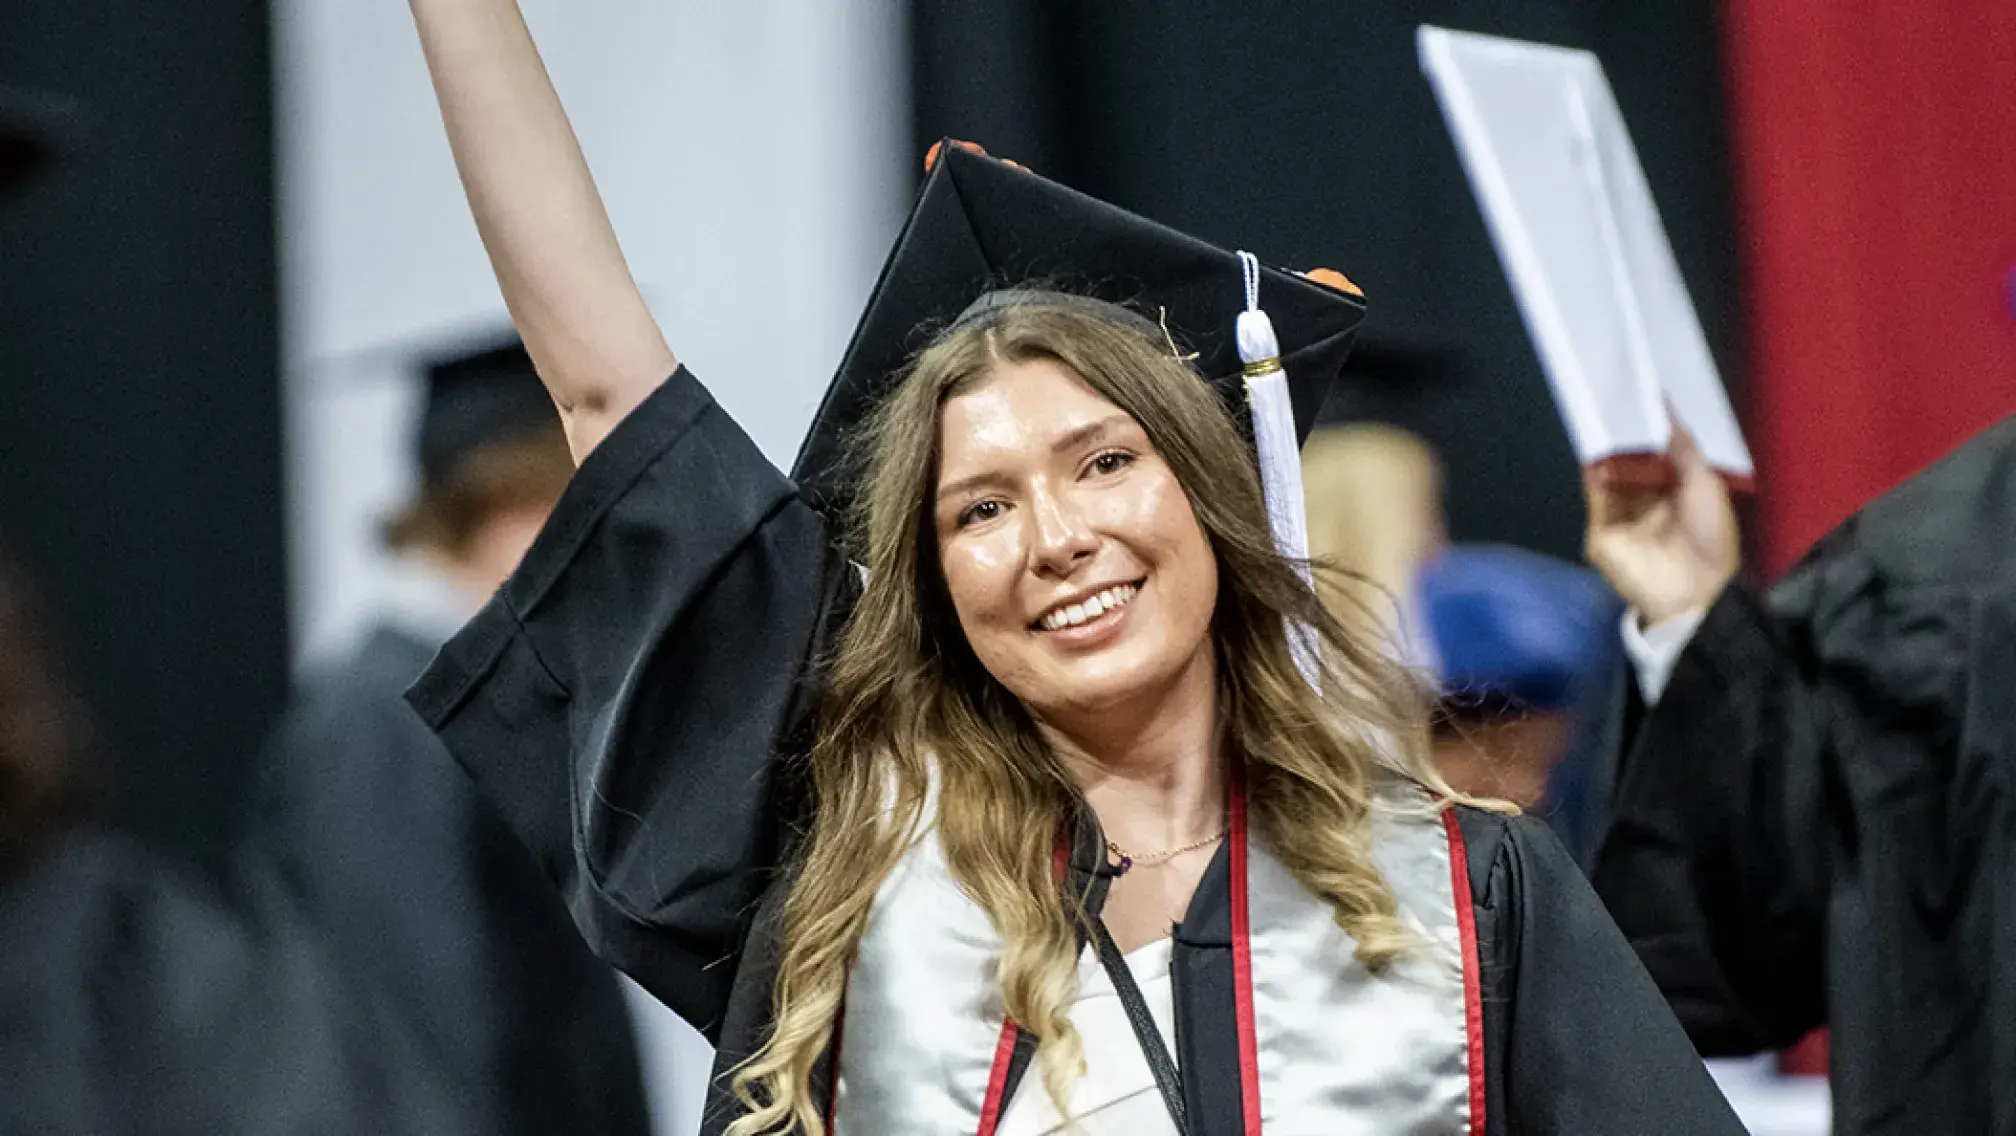 woman in cap and gown waving to the audience after receiving her diploma